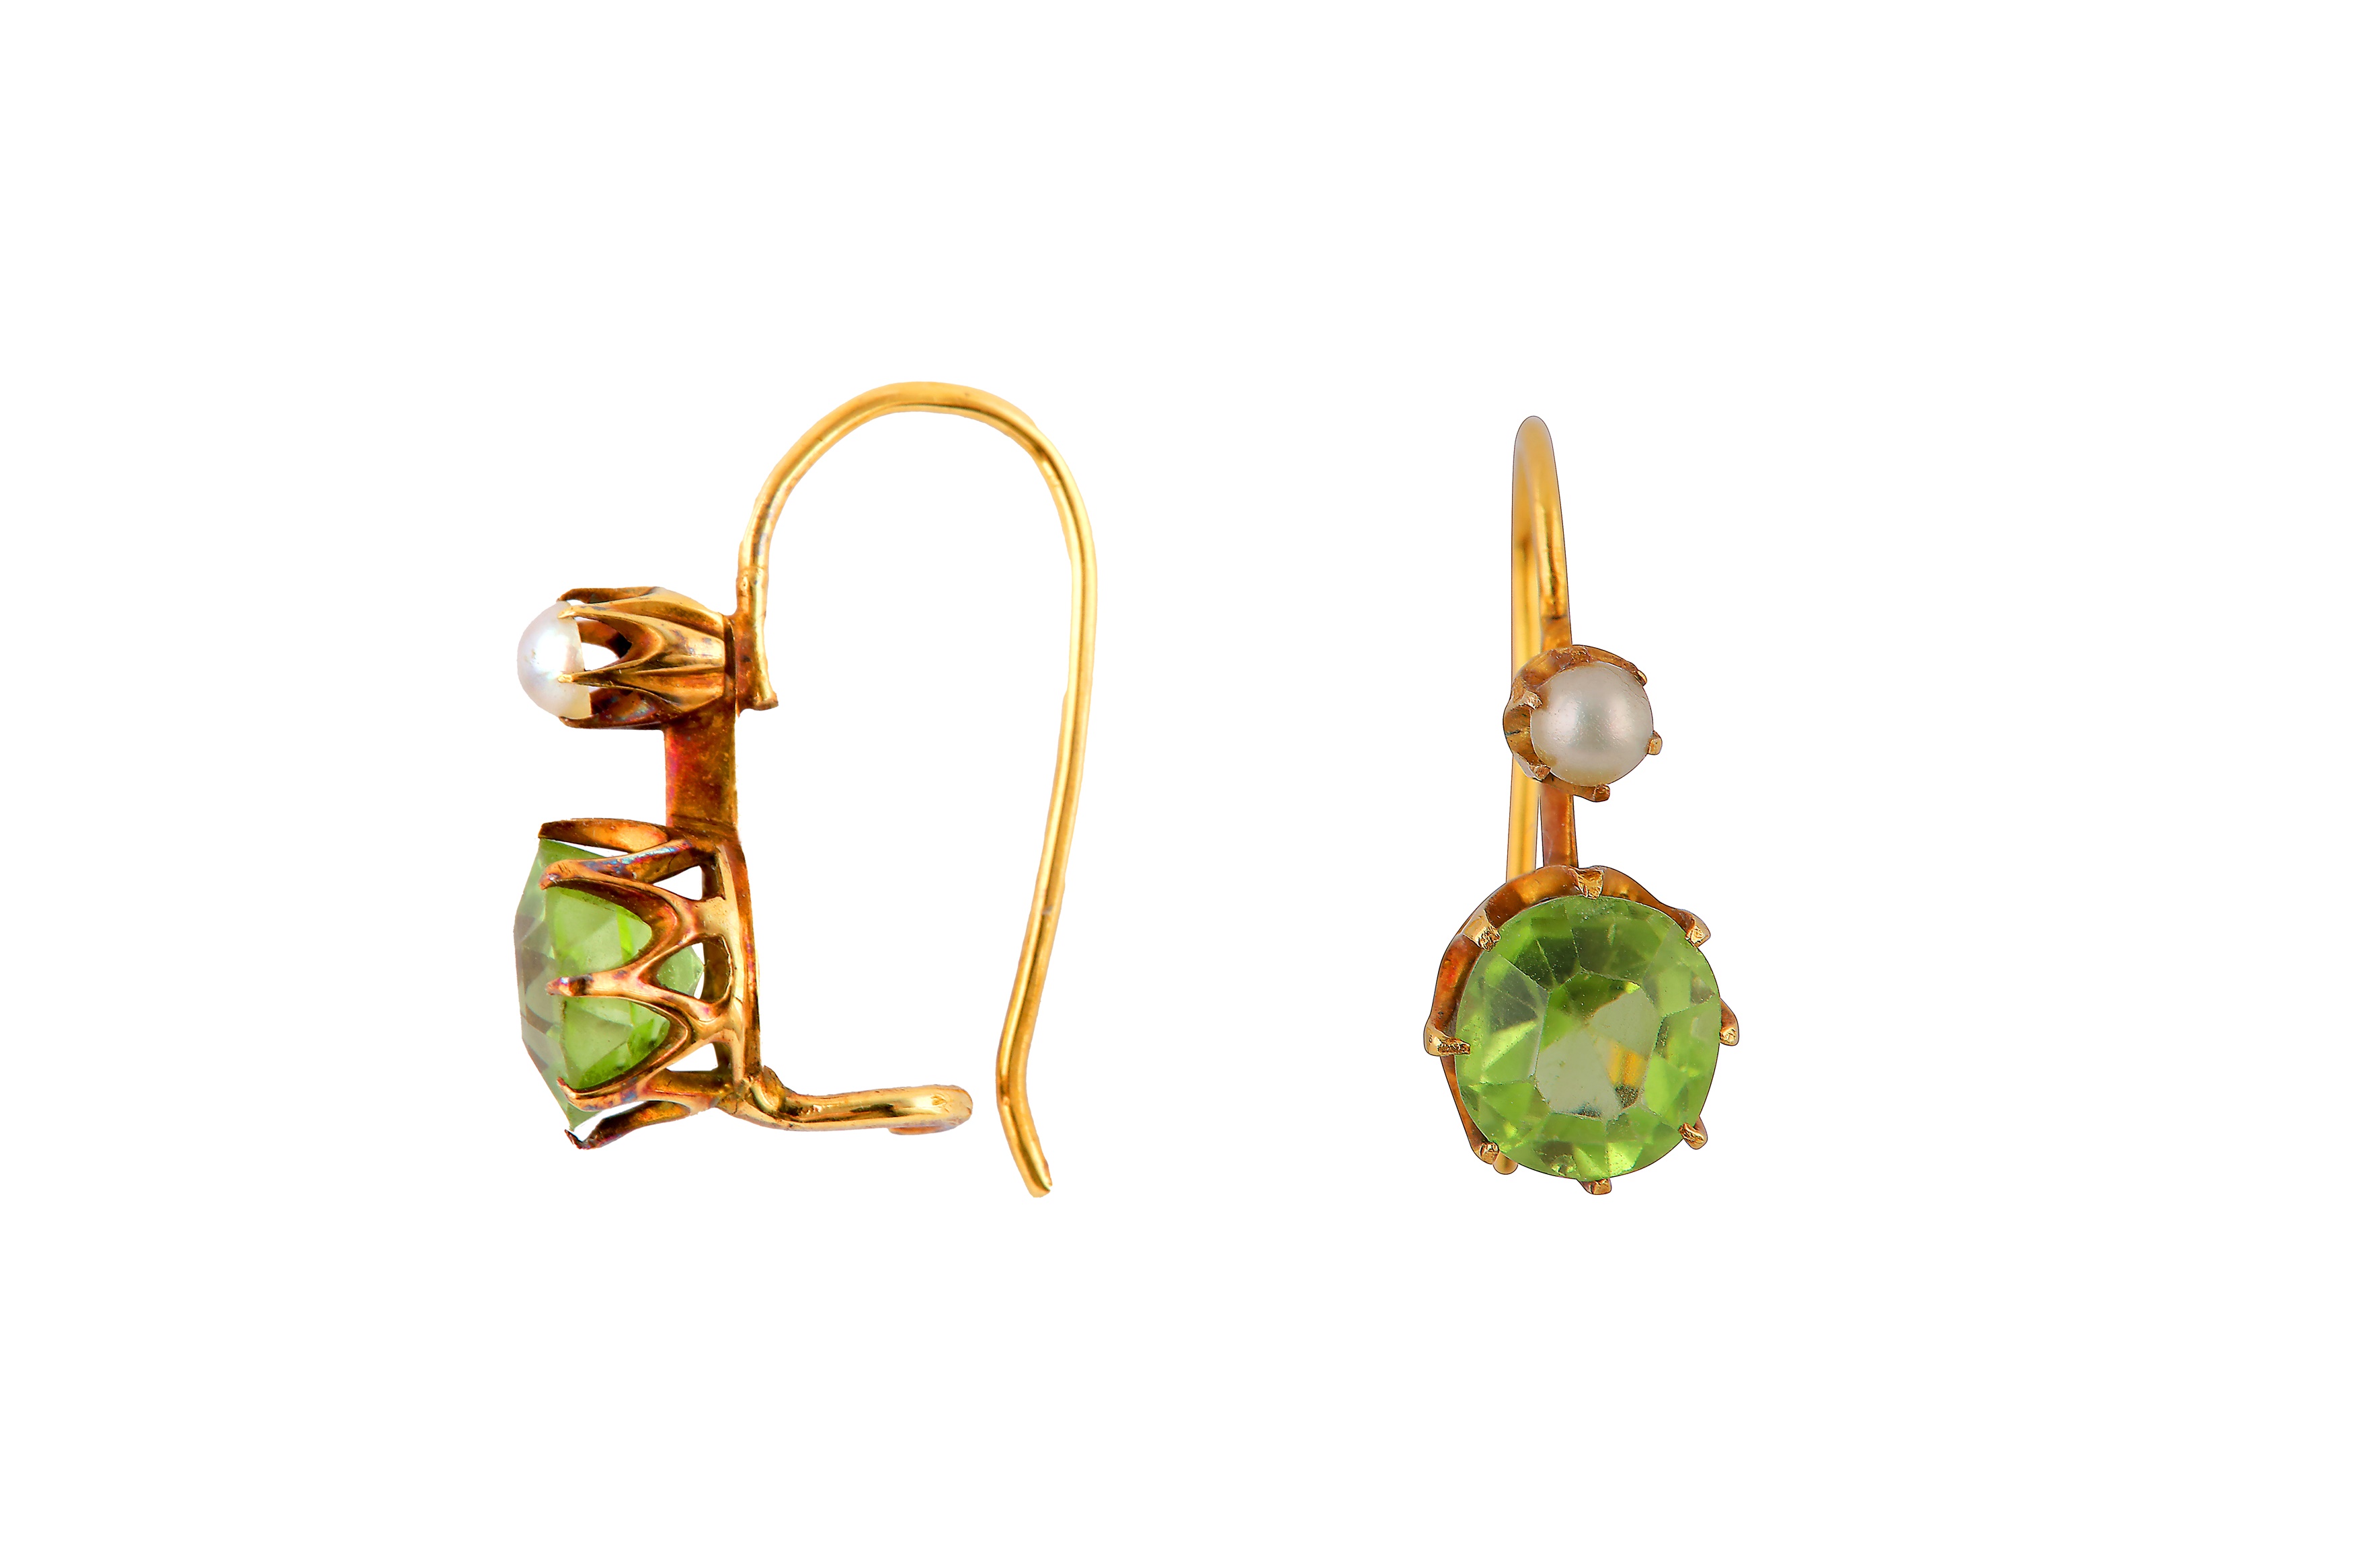 A PERIDOT AND SEED PEARL NECKLACE AND EARRING SUITE - Image 6 of 6